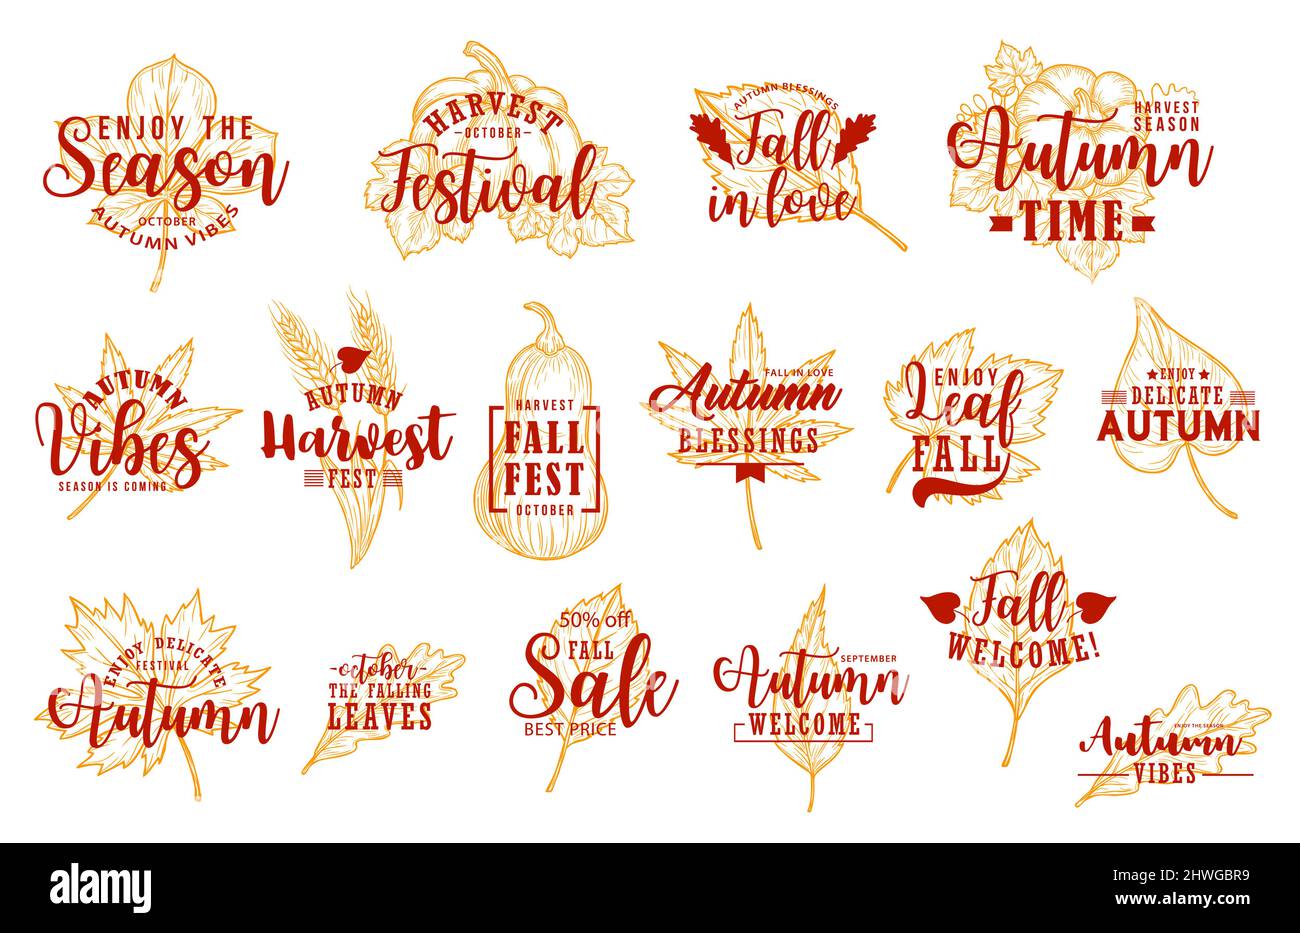 Autumn harvest festival, seasonal sales lettering icons. Chestnut, maple and oak sketch vector leaves, ripe pumpkin and butternut squash, wheat ear. A Stock Vector